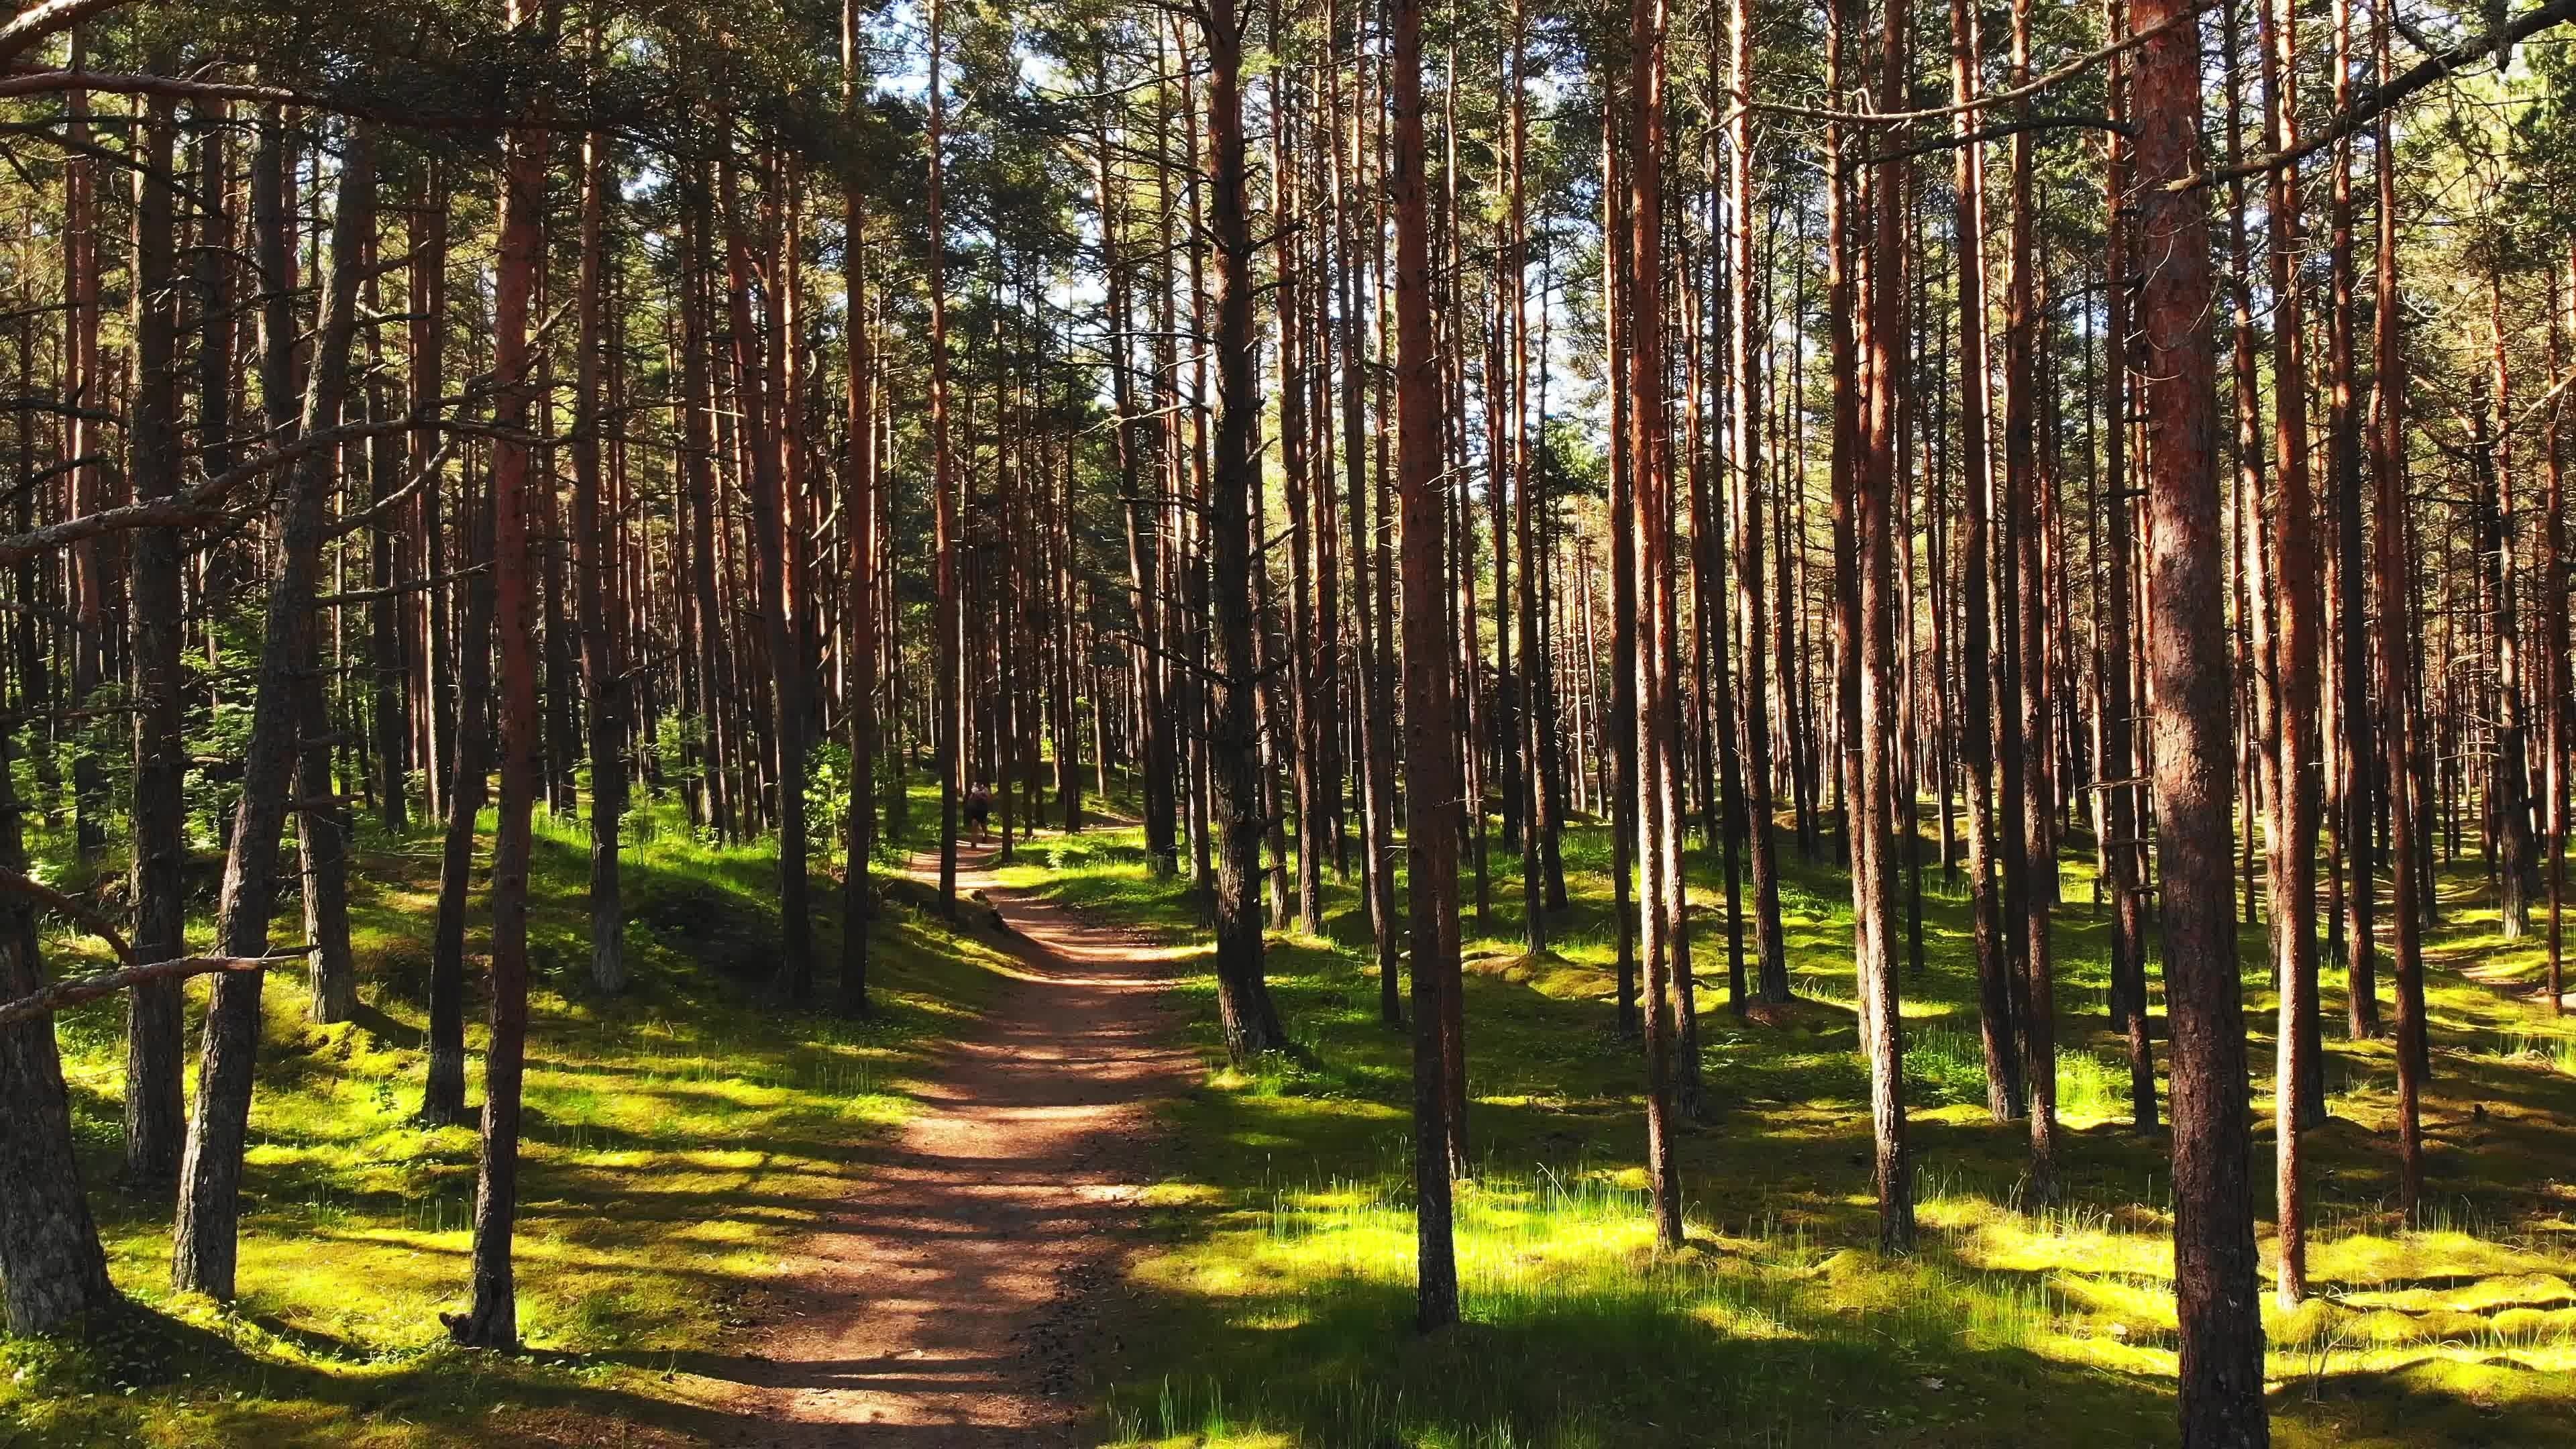 Outdoor workout, Pine tree forest, Weight loss, Active lifestyle, 3840x2160 4K Desktop